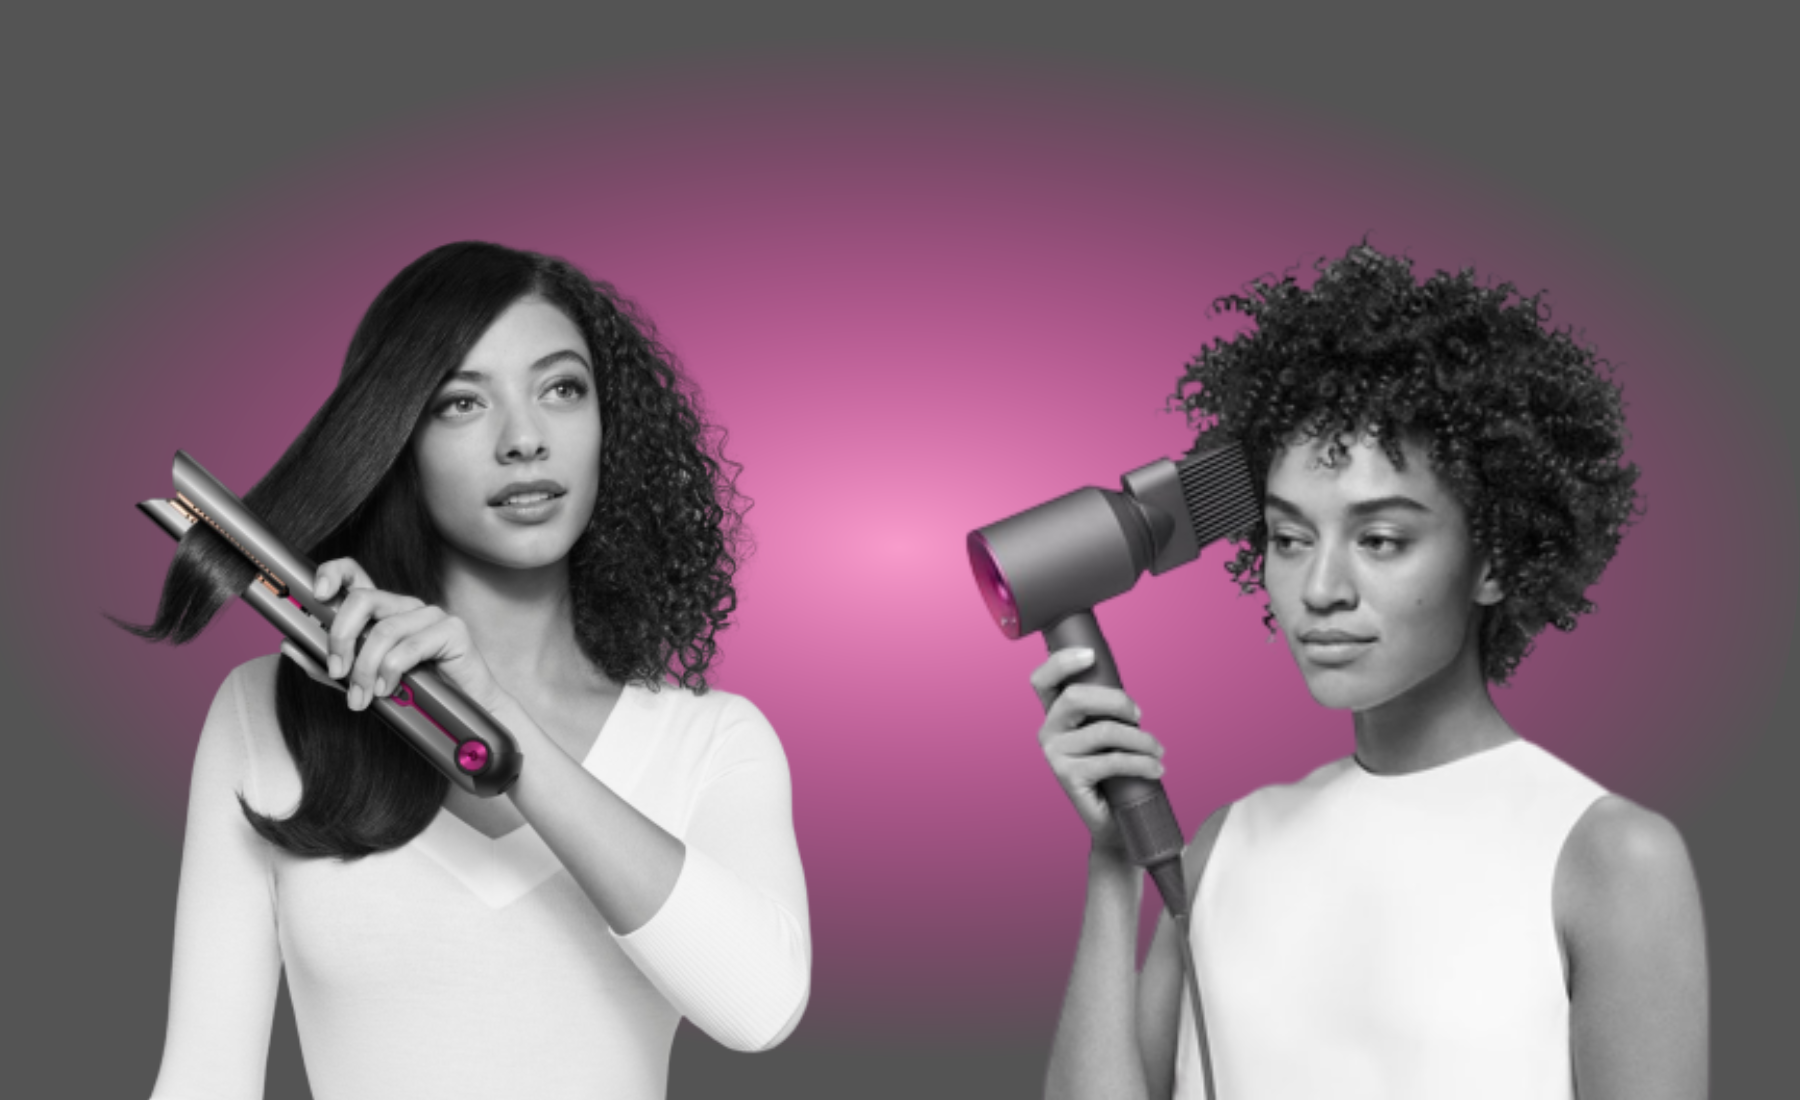 Two people styling hair with Dyson hair tools with gray and pink graphic in background